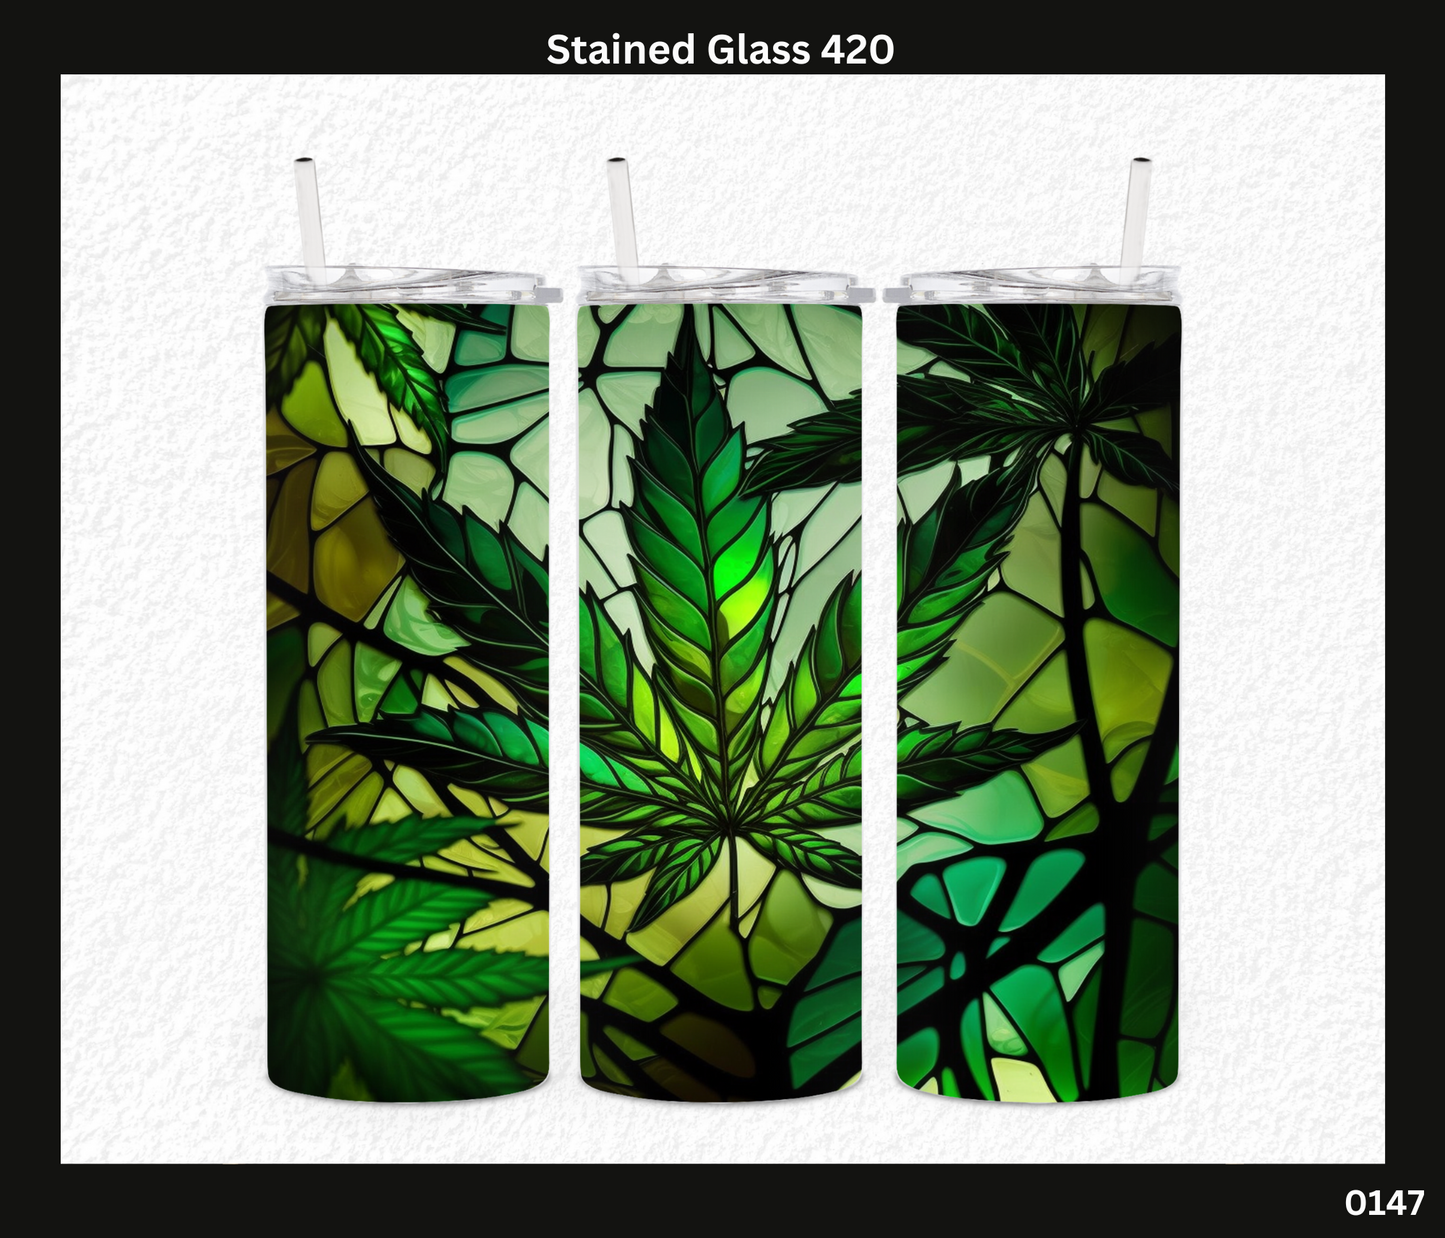 Stained glass 420